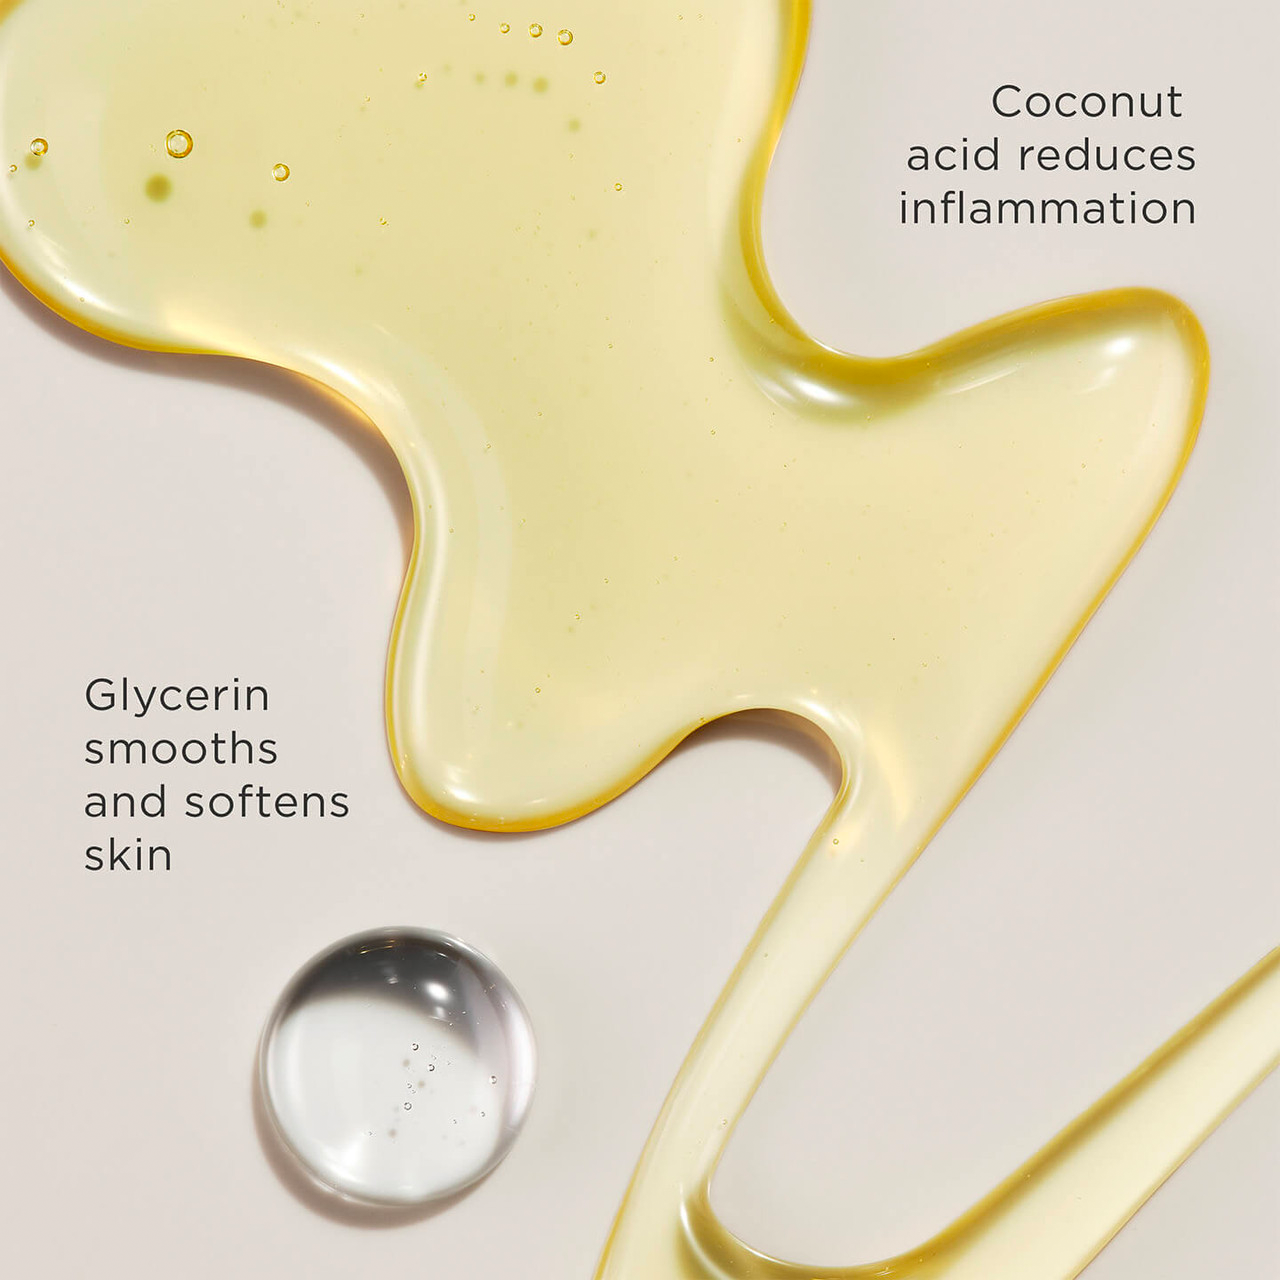 Coconut acid reduces inflammation. Glycerin smooths and softens skin.